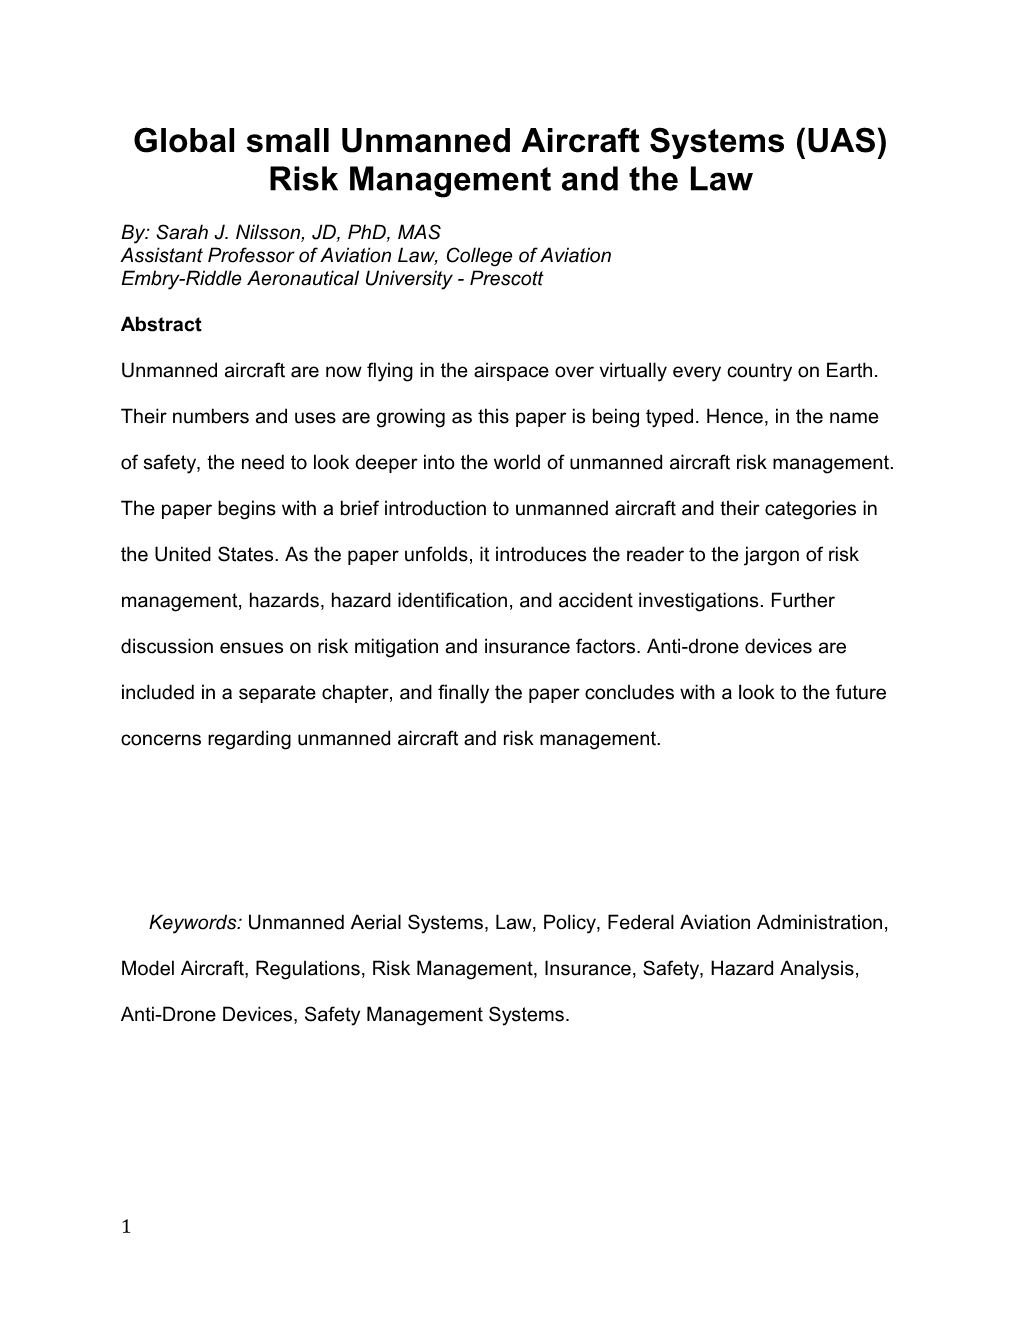 Global Small Unmanned Aircraft Systems (UAS) Risk Management and the Law